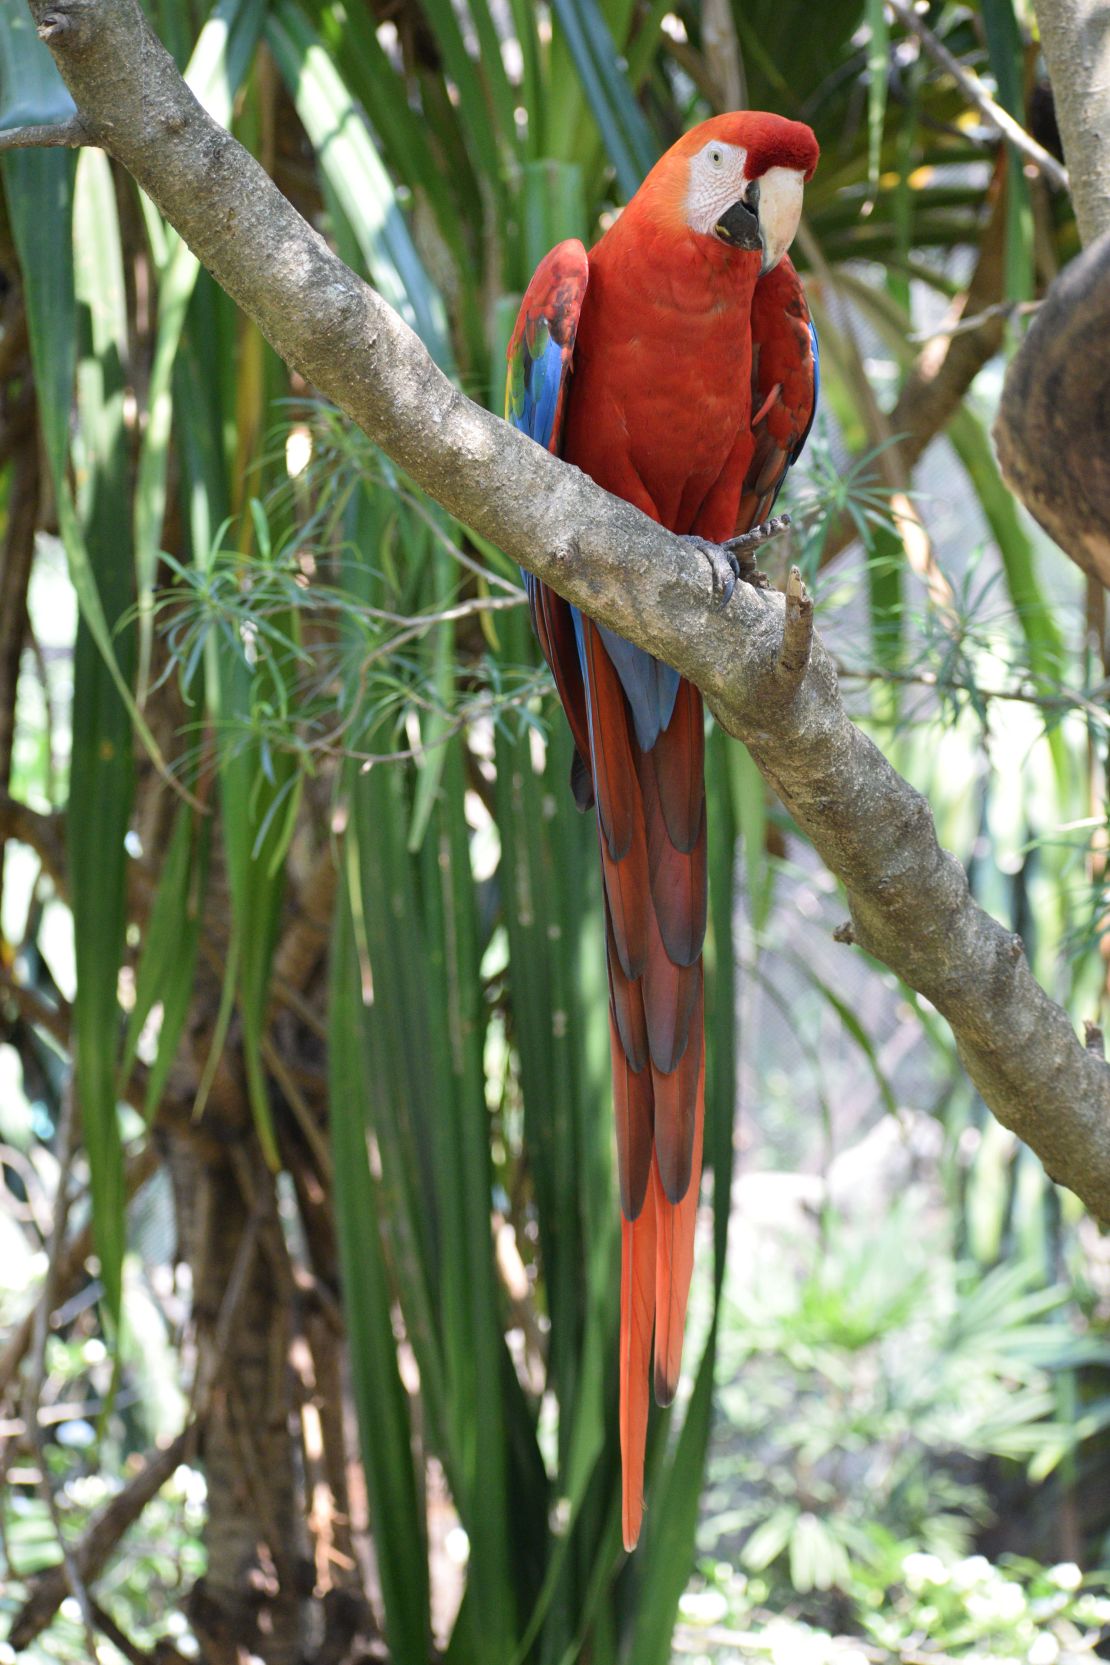 Shown is a scarlet macaw from the Bolivian Amazon.